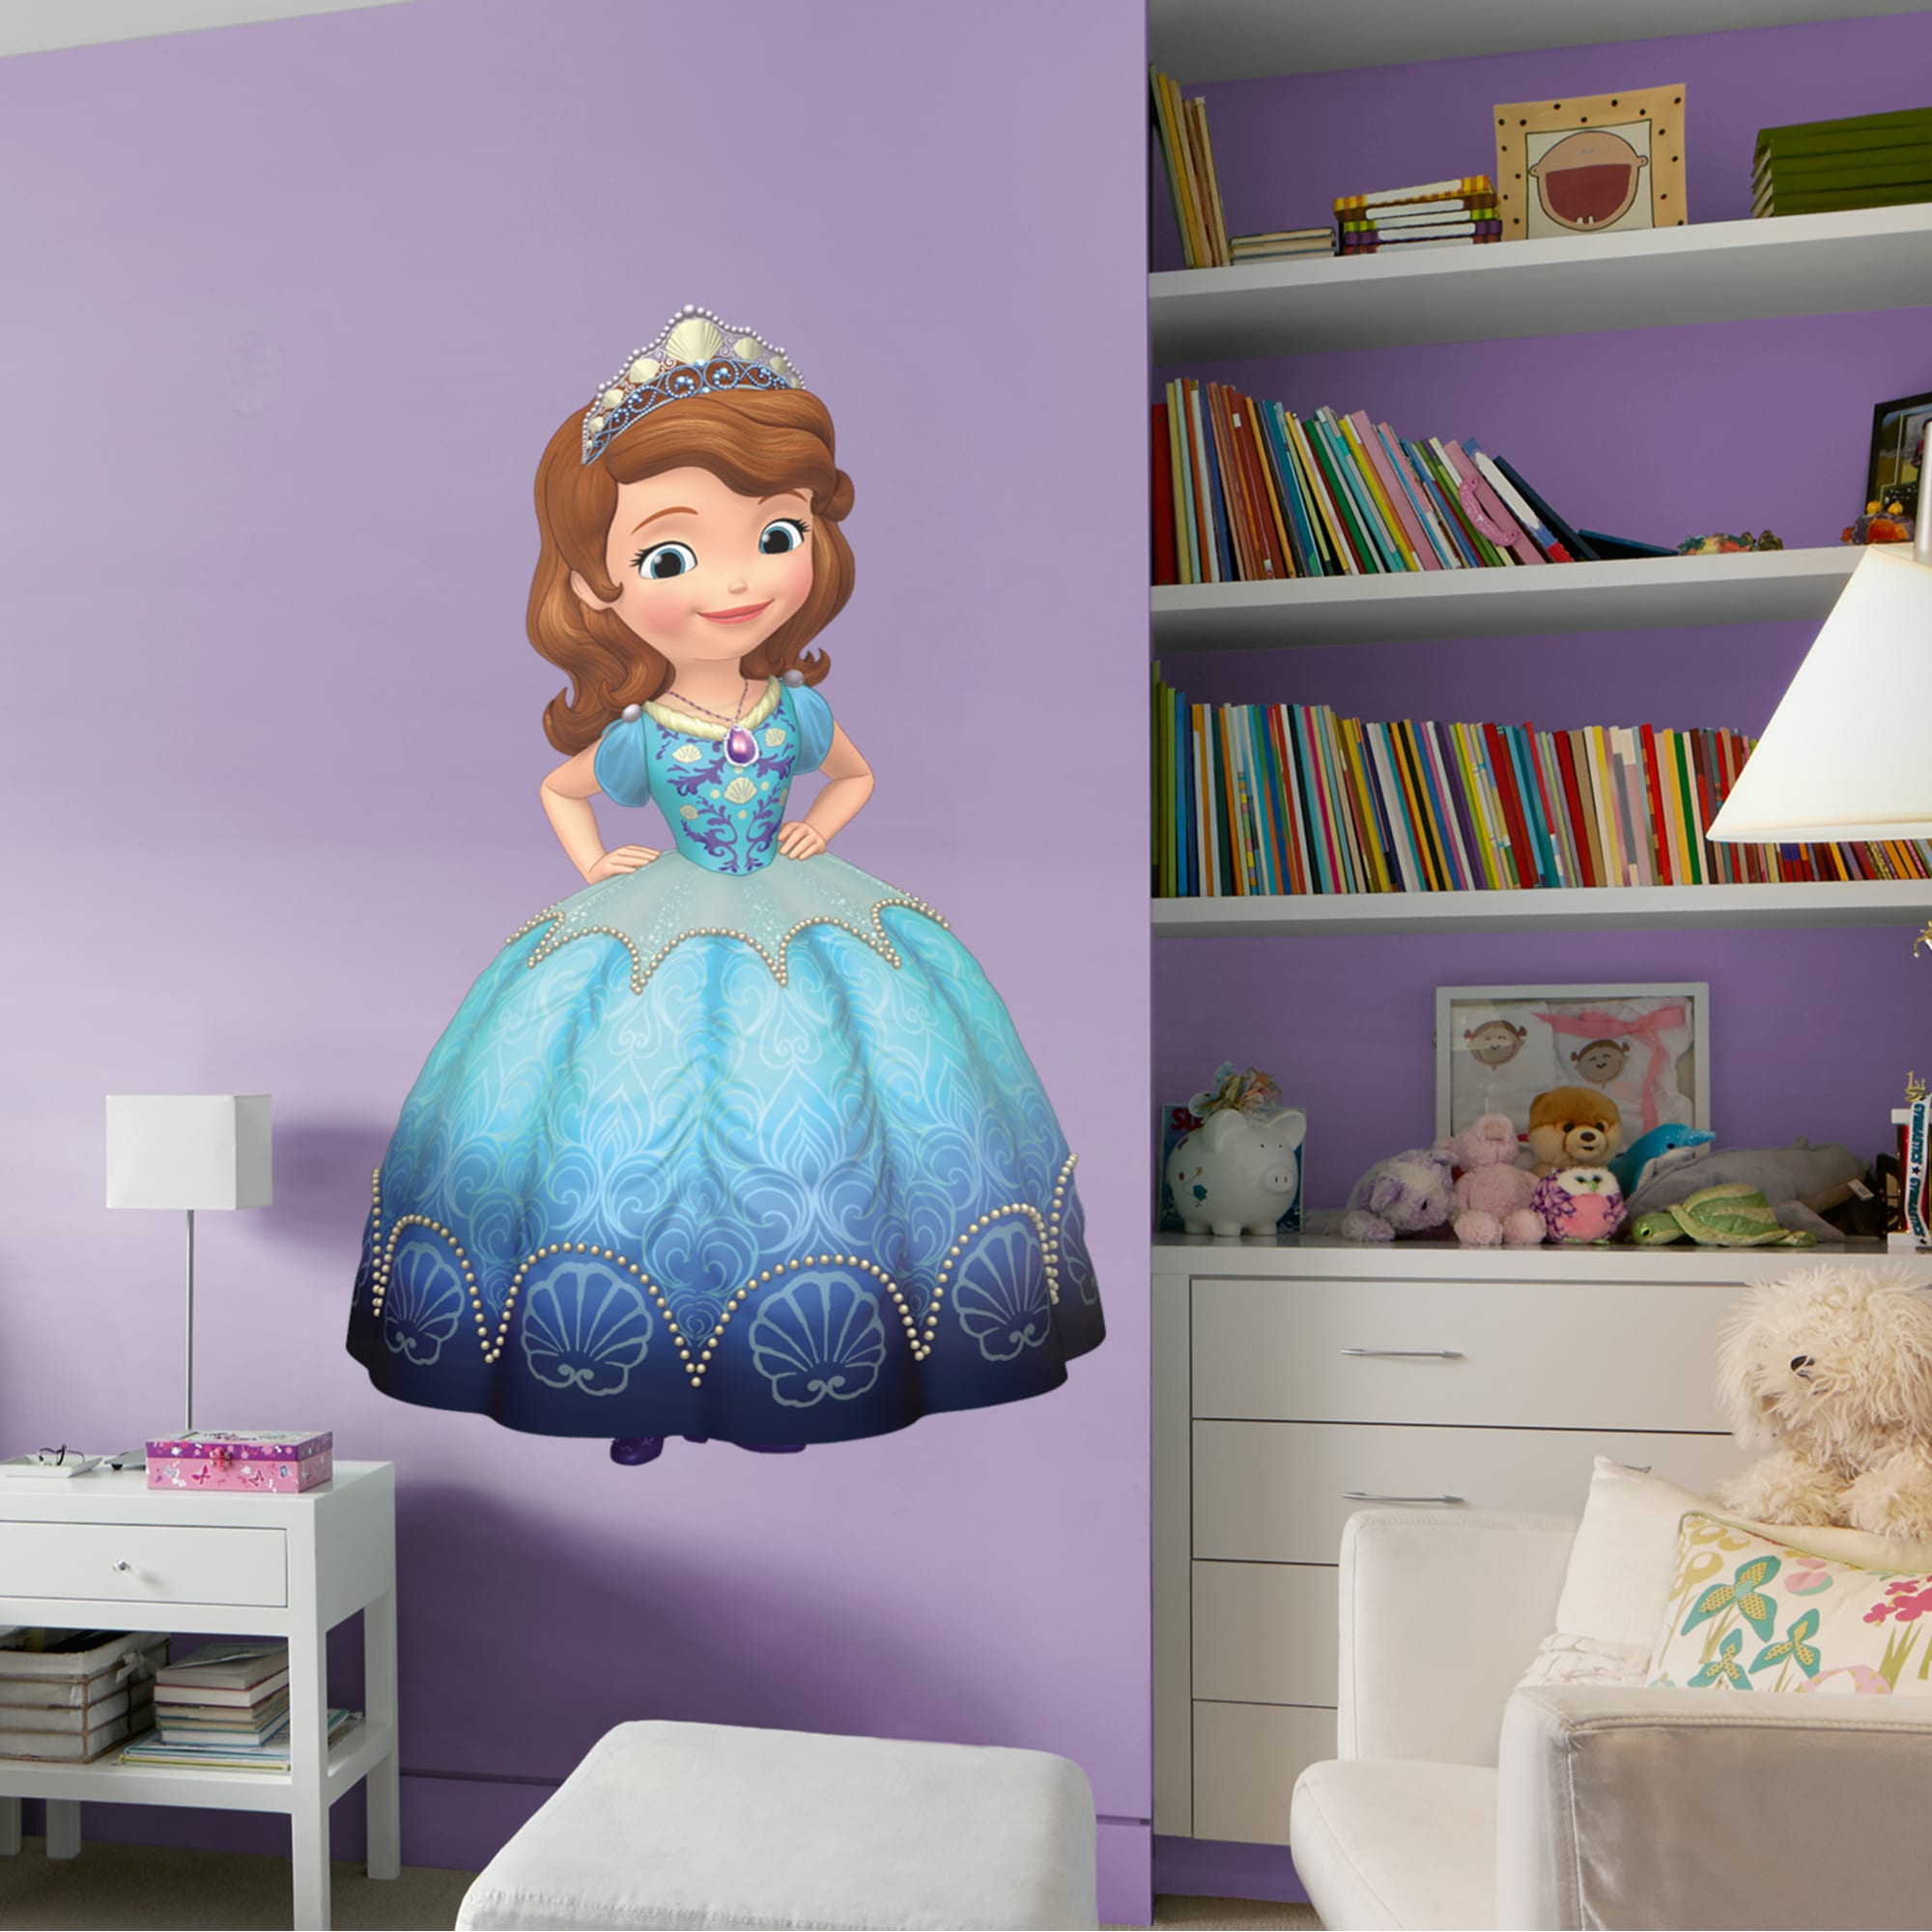 Sofia the First: Pearl of the Sea - Officially Licensed Disney Removable Wall Decal 32.0"W x 51.0"H by Fathead | Vinyl